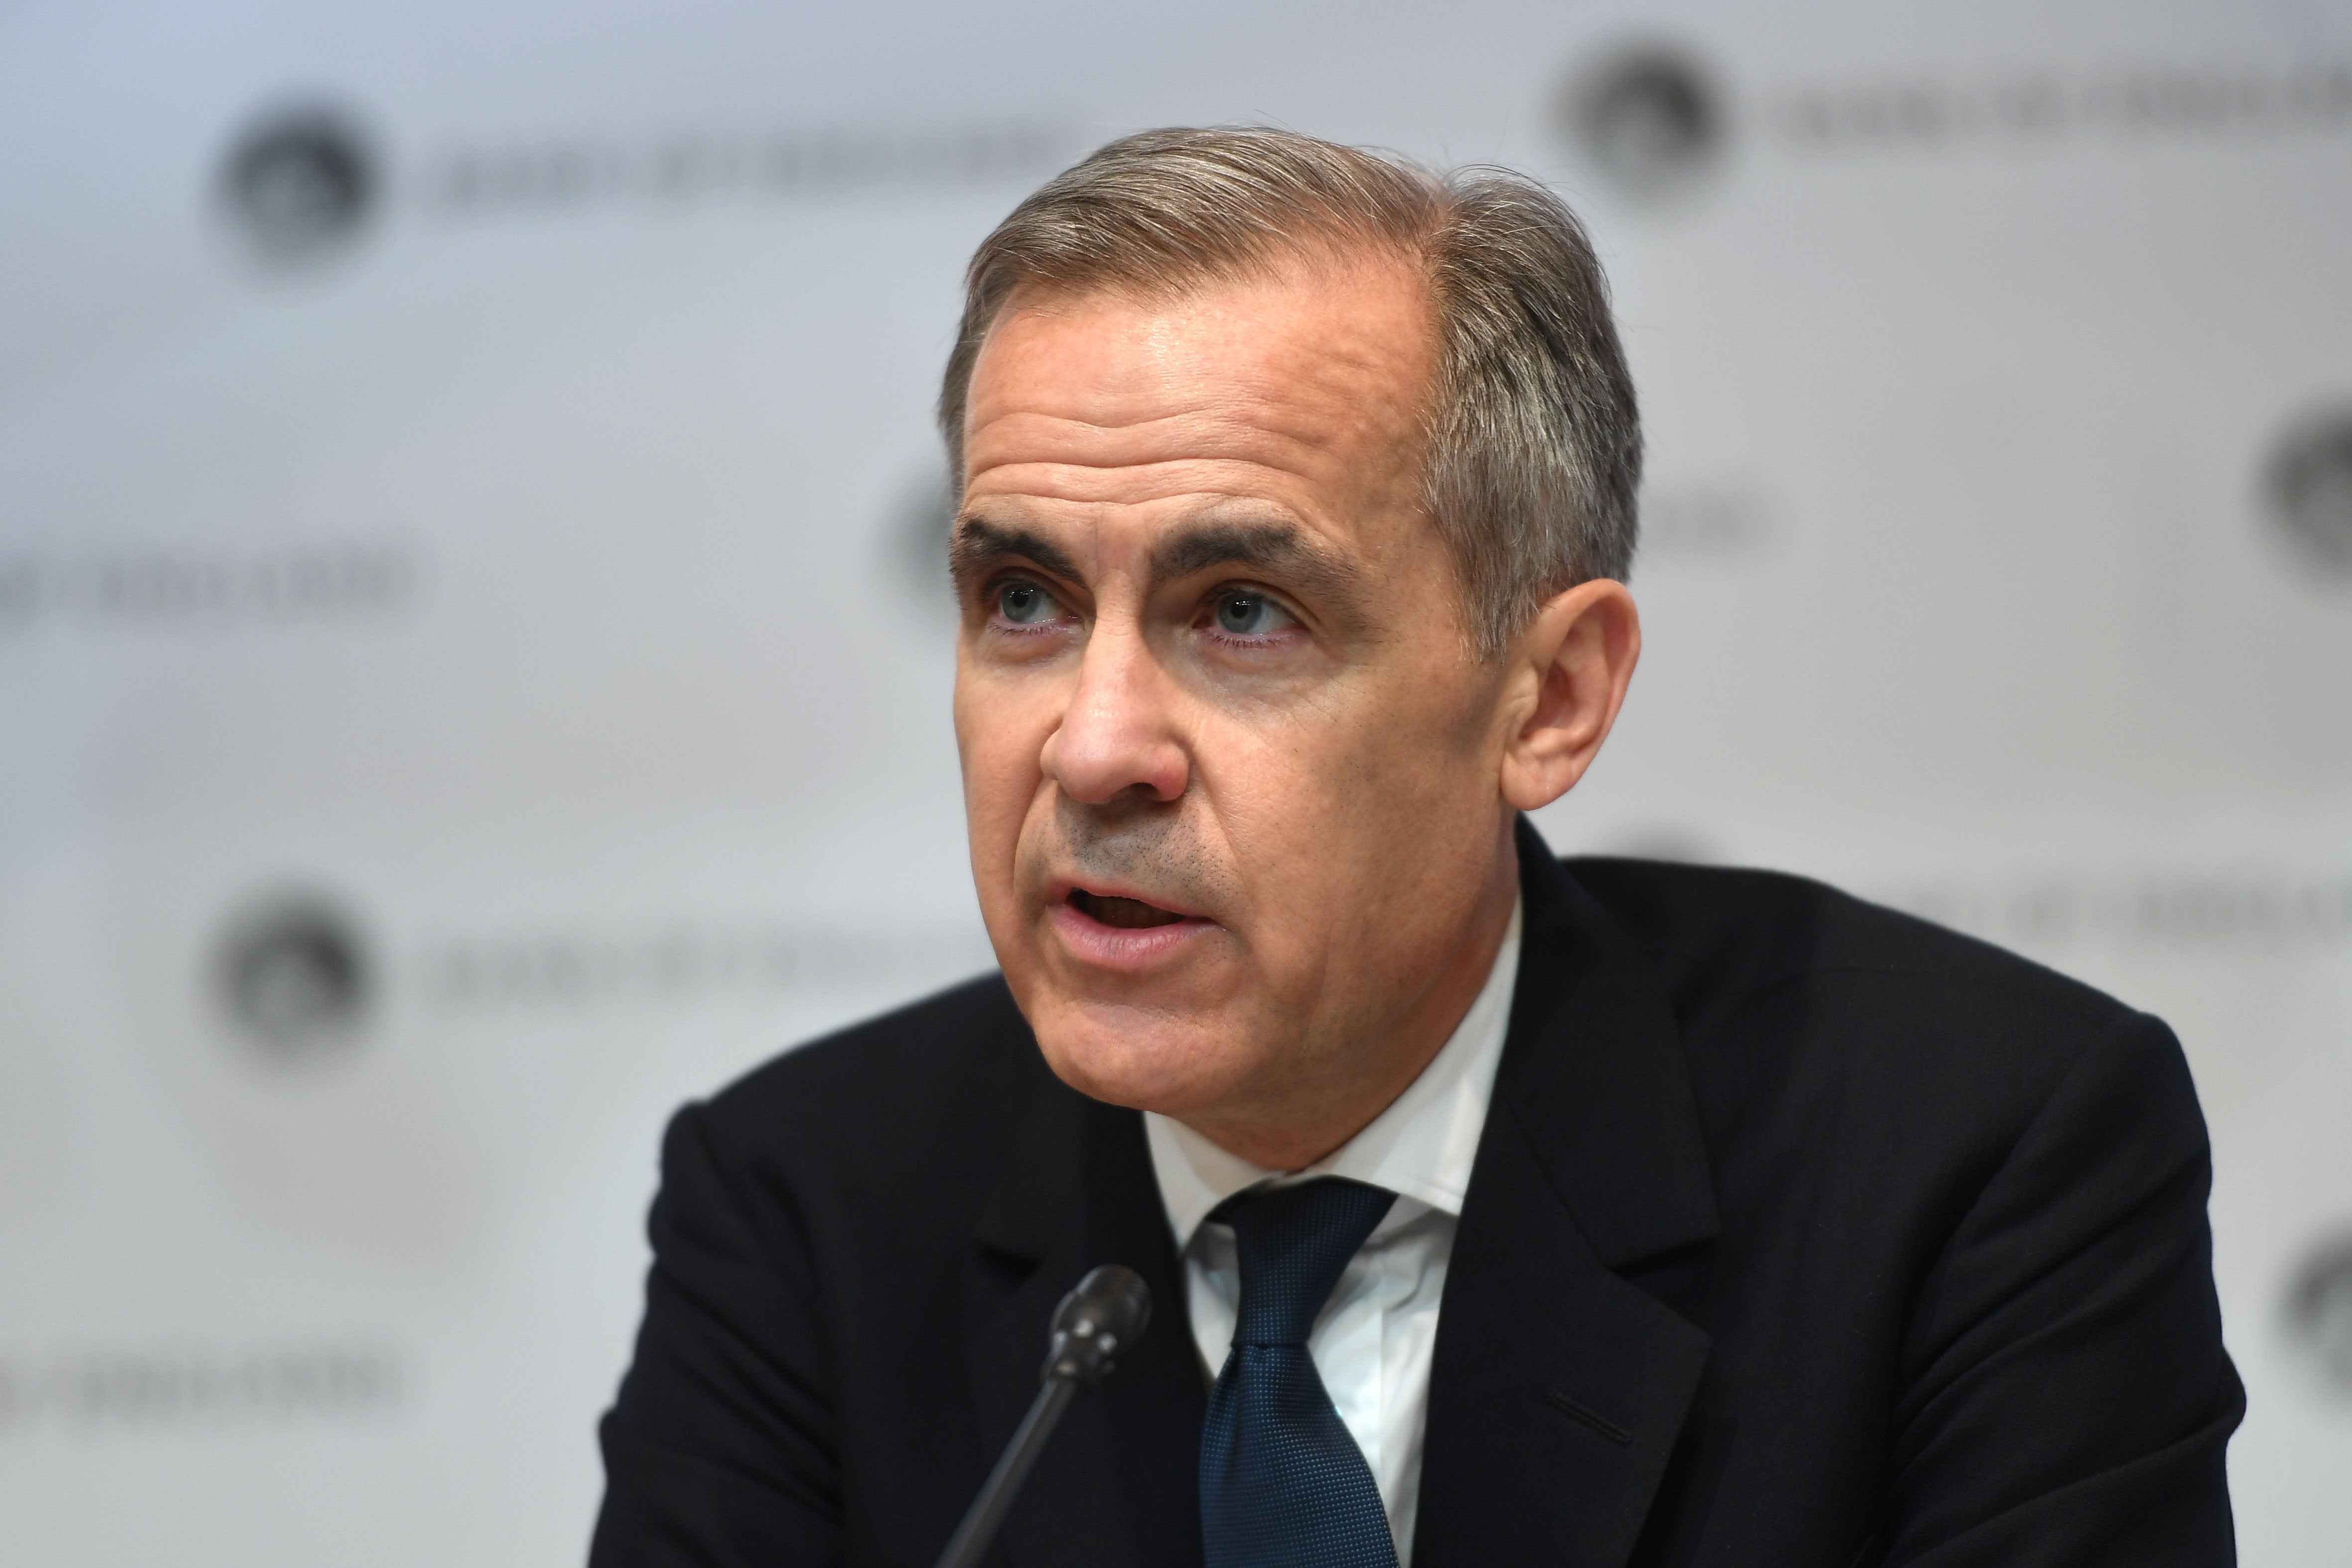 Mark Carney at a press conference in 2020.